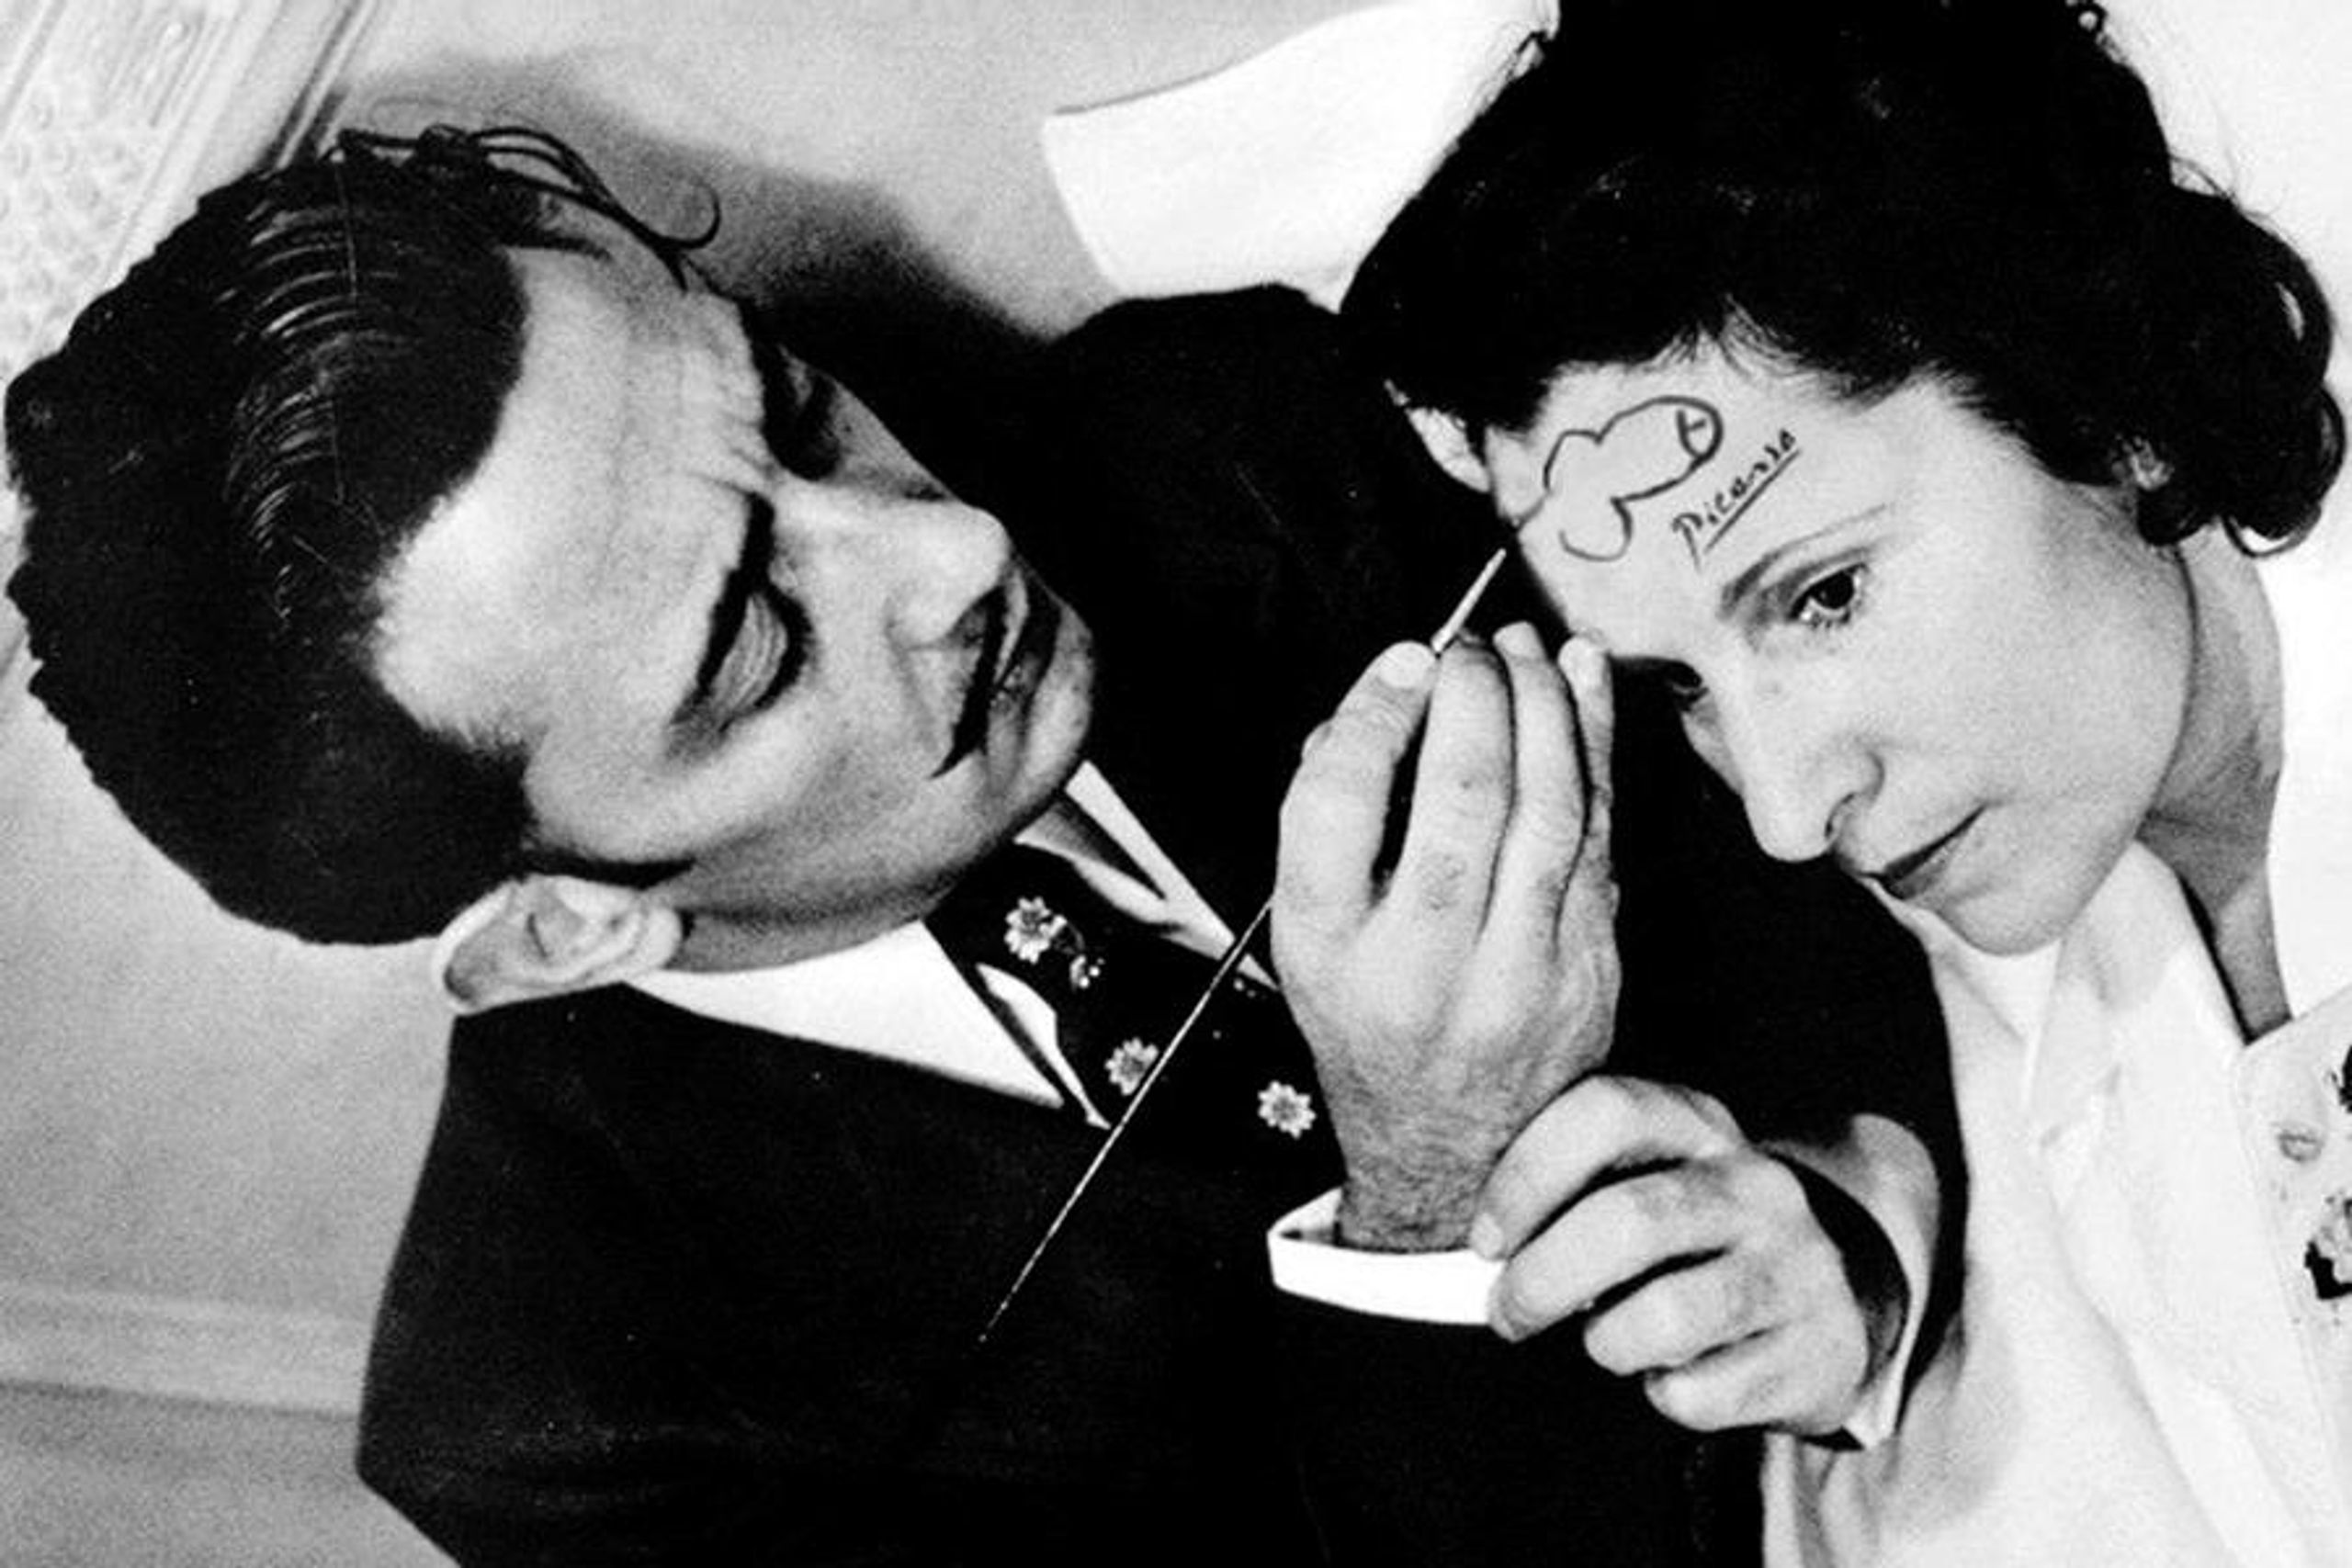 Dali drawing a dick on a woman's forehead.